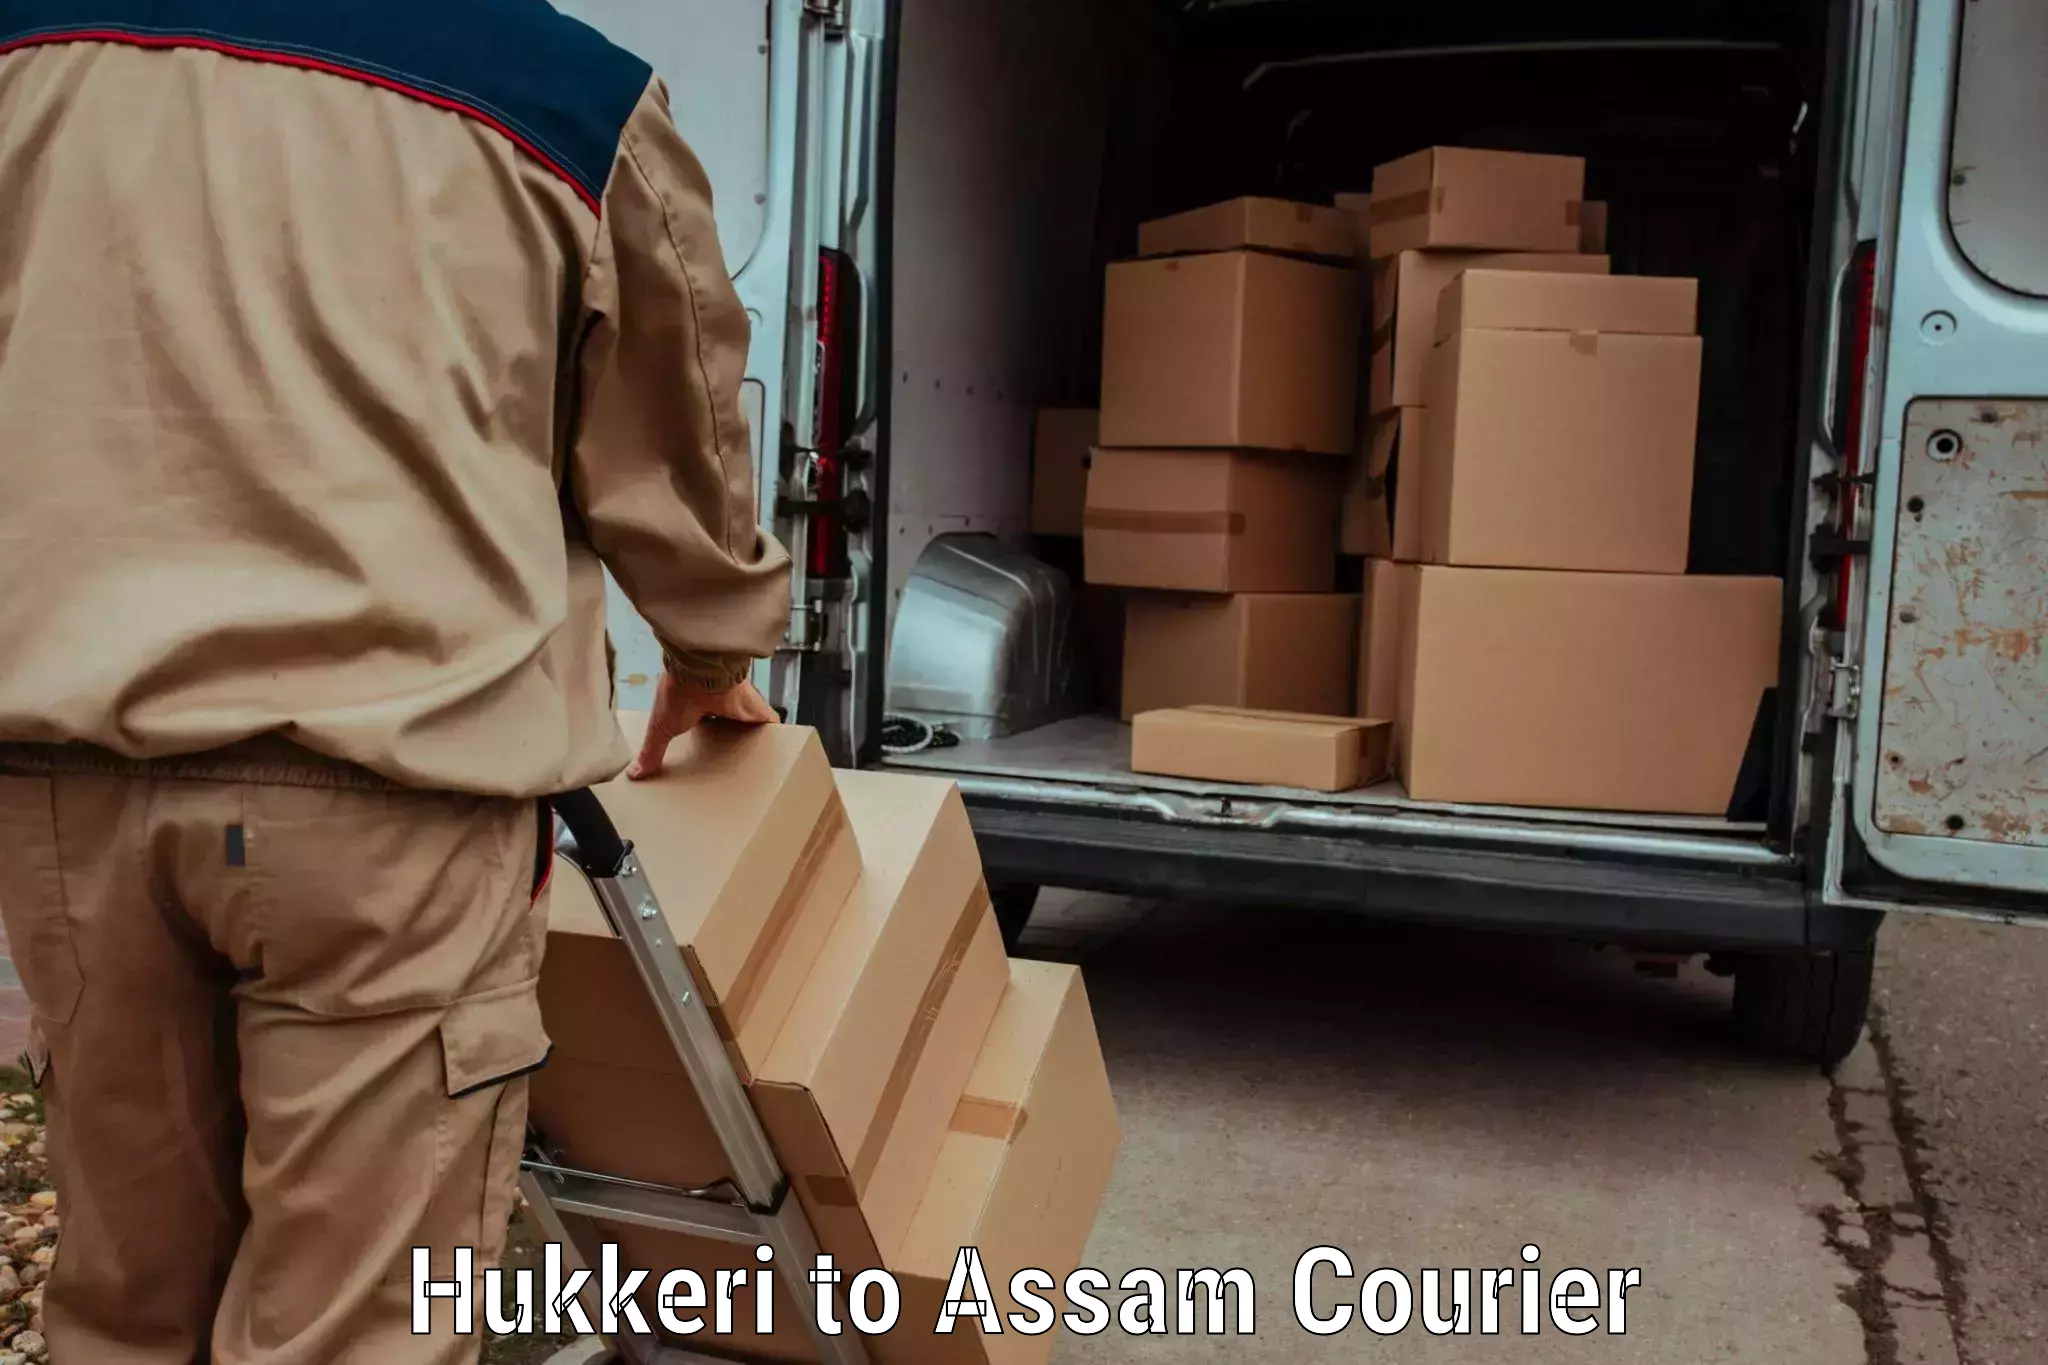 Same-day delivery solutions Hukkeri to Balapara